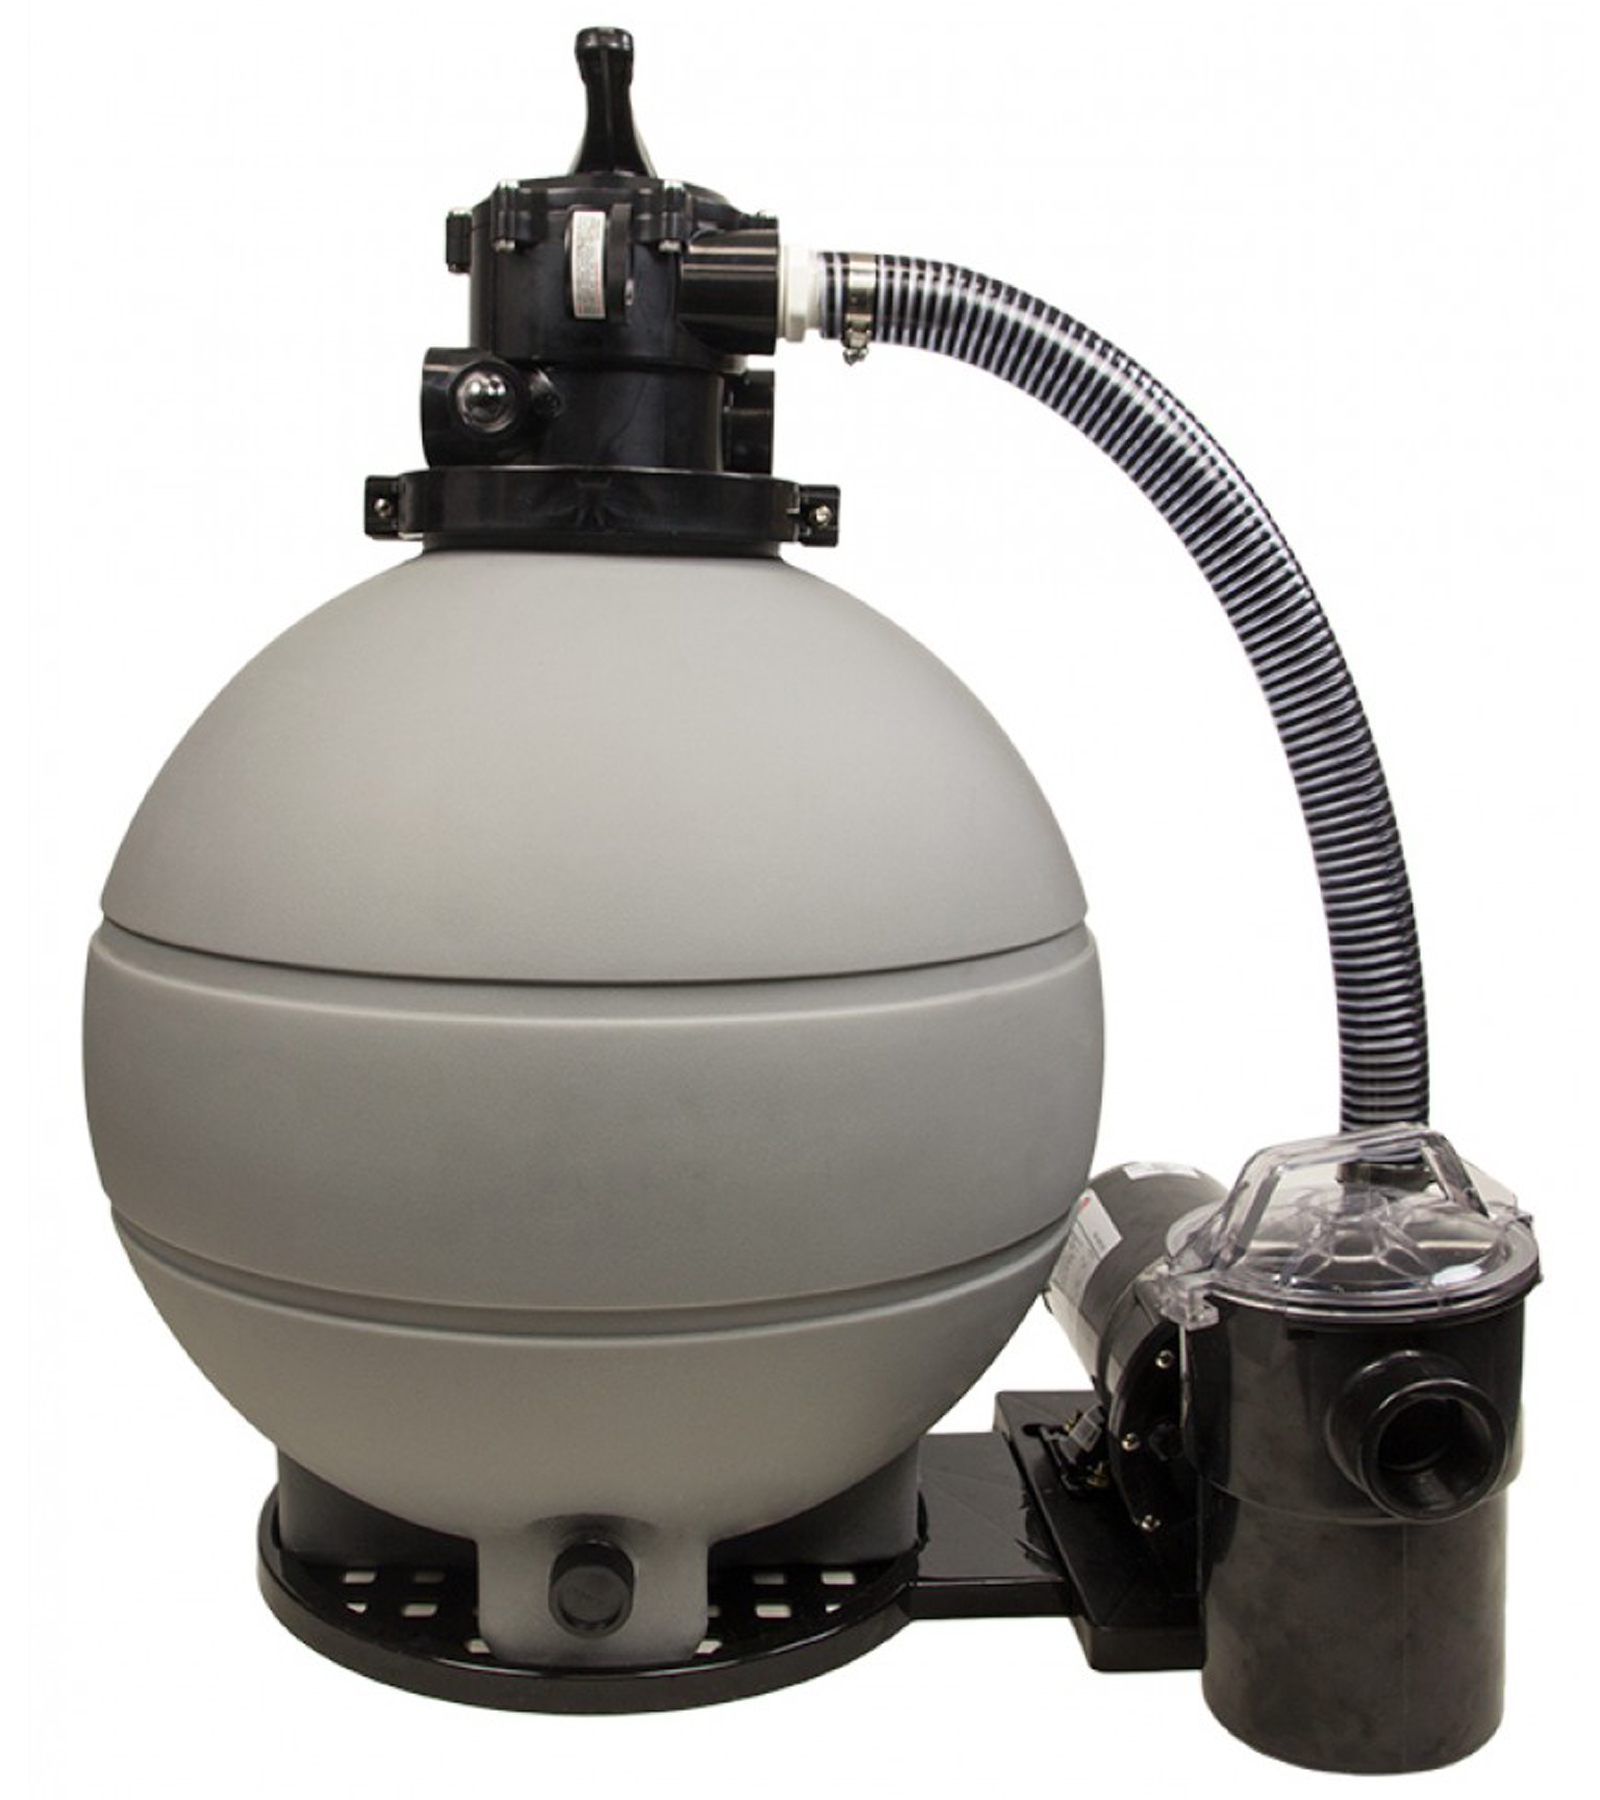 22 Above Ground Pool Sand Filter System With 1 Hp Pump 200 Lb Sand Capacity Ebay